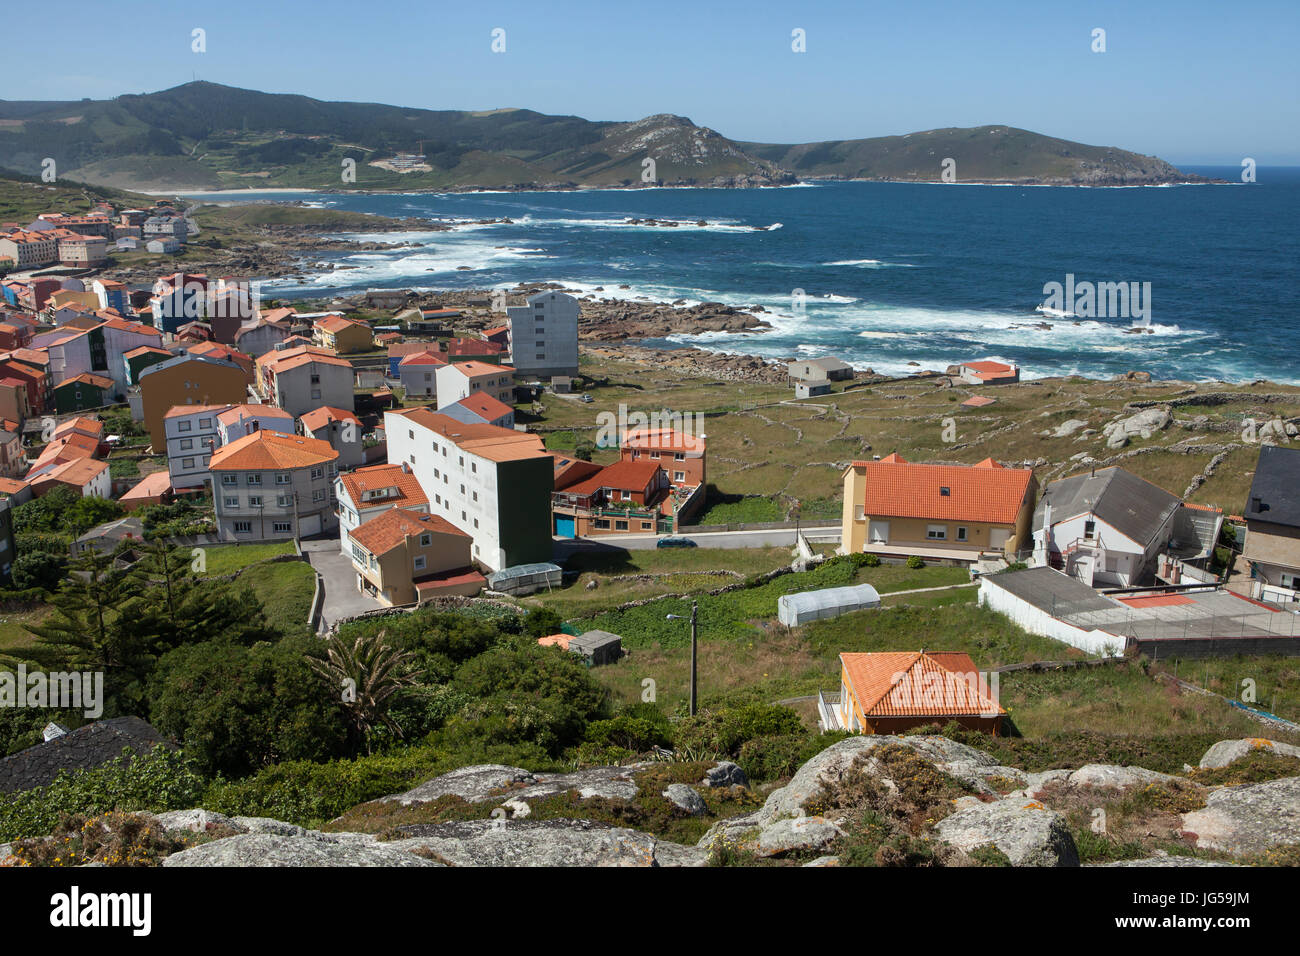 Town of Muxía on the coast of the Atlantic Ocean, known as the Costa de la Muerte (Coast of Death), pictured from Monte Corpiño in Galicia, Spain. Stock Photo